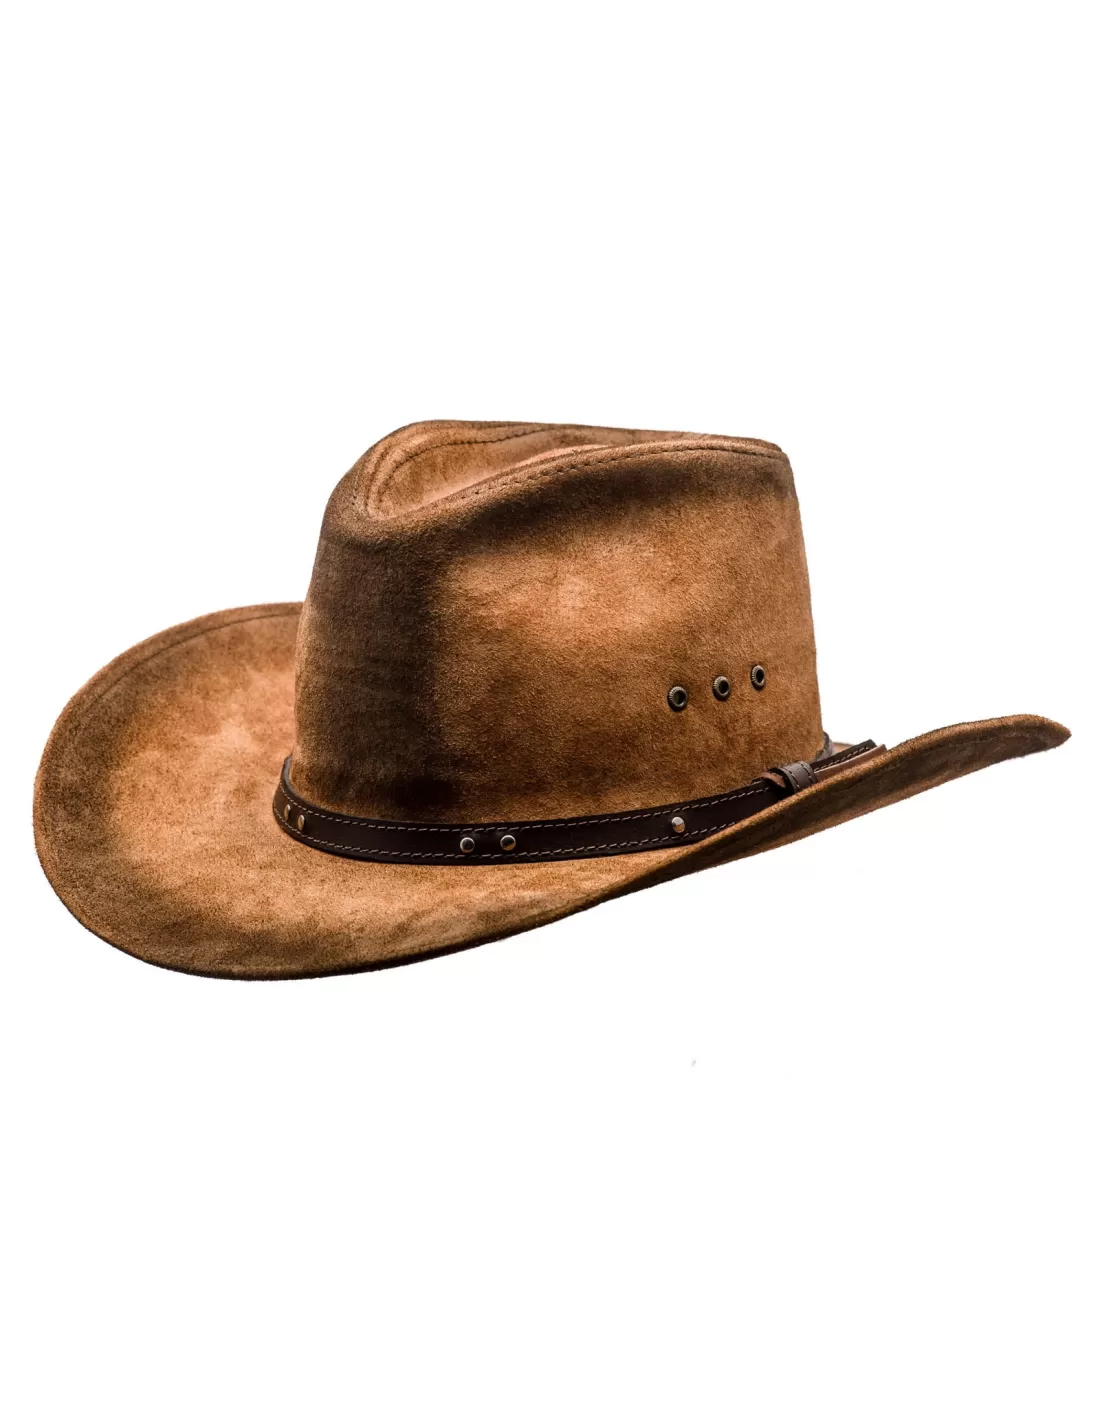 LEATHER HATS COWBOYS WESTERN STYLE BUSH HATS TOP QUALITY 